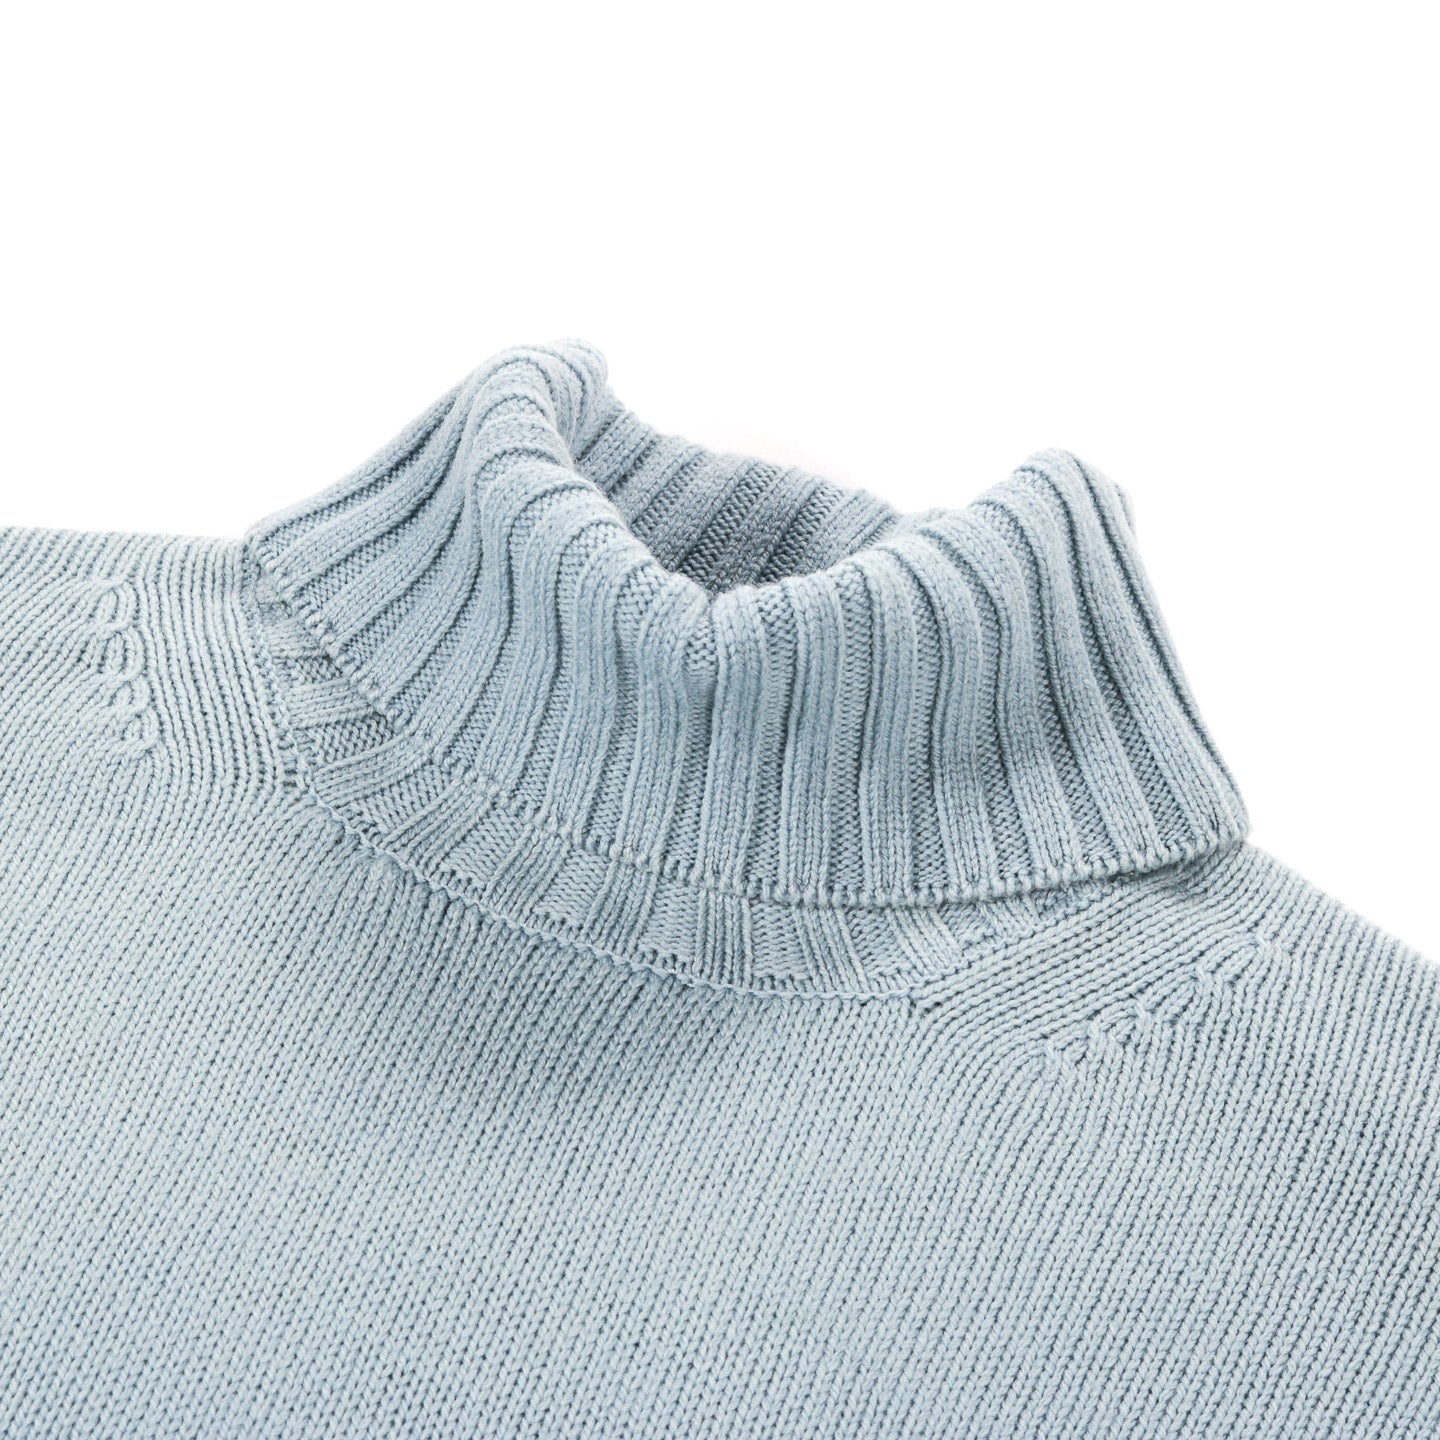 AURALEE WASHED FRENCH MERINO KNIT TURTLE LIGHT BLUE